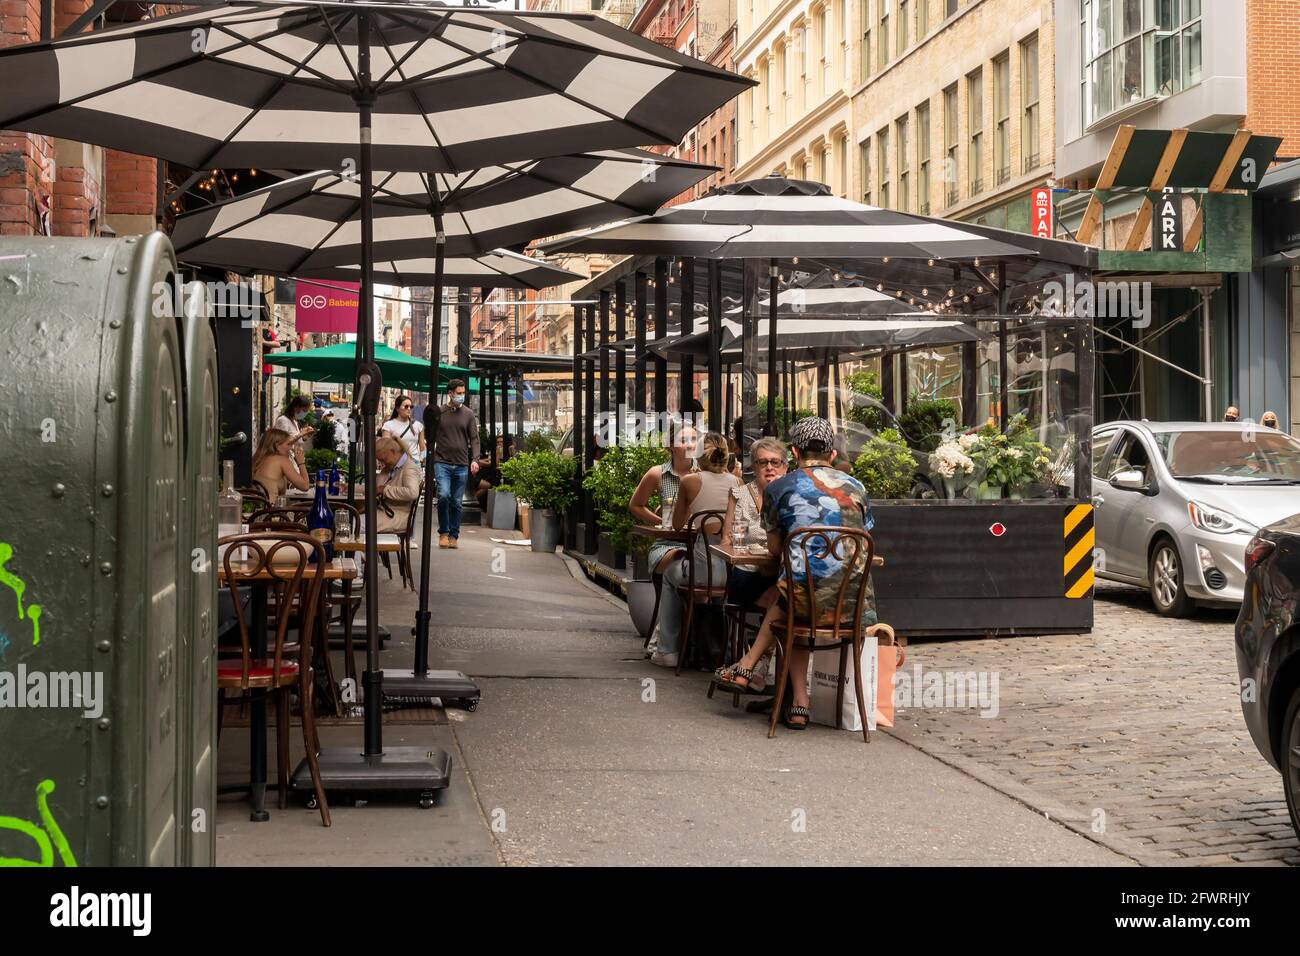 New York, USA. 22nd May, 2021. Al fresco dining in the Soho neighborhood in New York on Saturday, May 22, 2021. New York has relaxed mask mandates allowing most outdoor activities to be mask free as well as many indoor settings, with caveats. (ÂPhoto by Richard B. Levine) Credit: Sipa USA/Alamy Live News Stock Photo